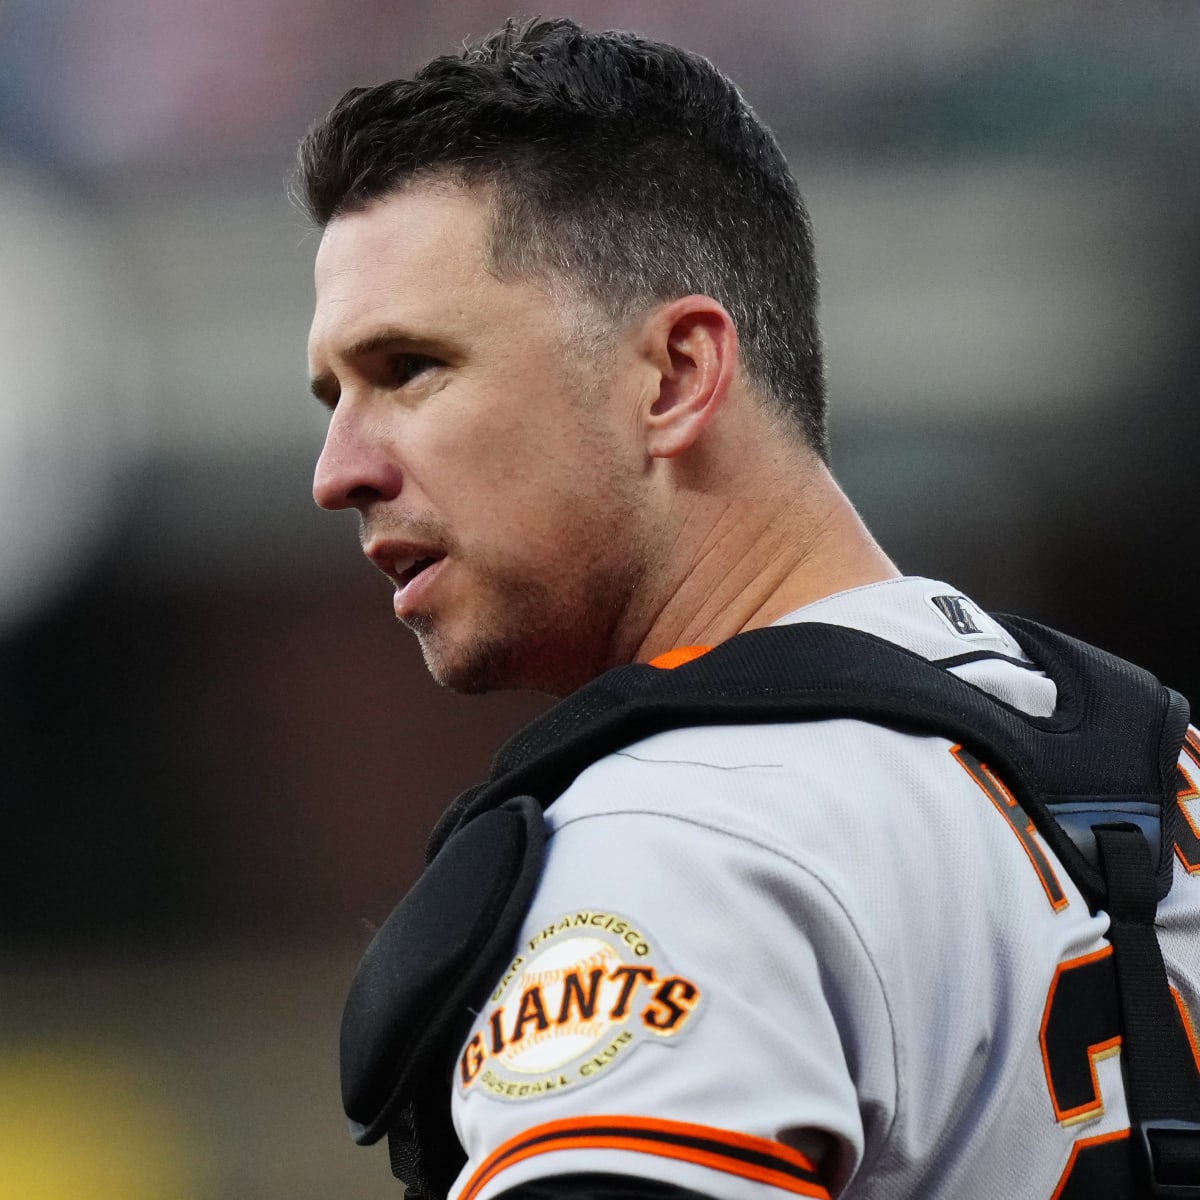 Would the SF Giants have reached postseason with Buster Posey?